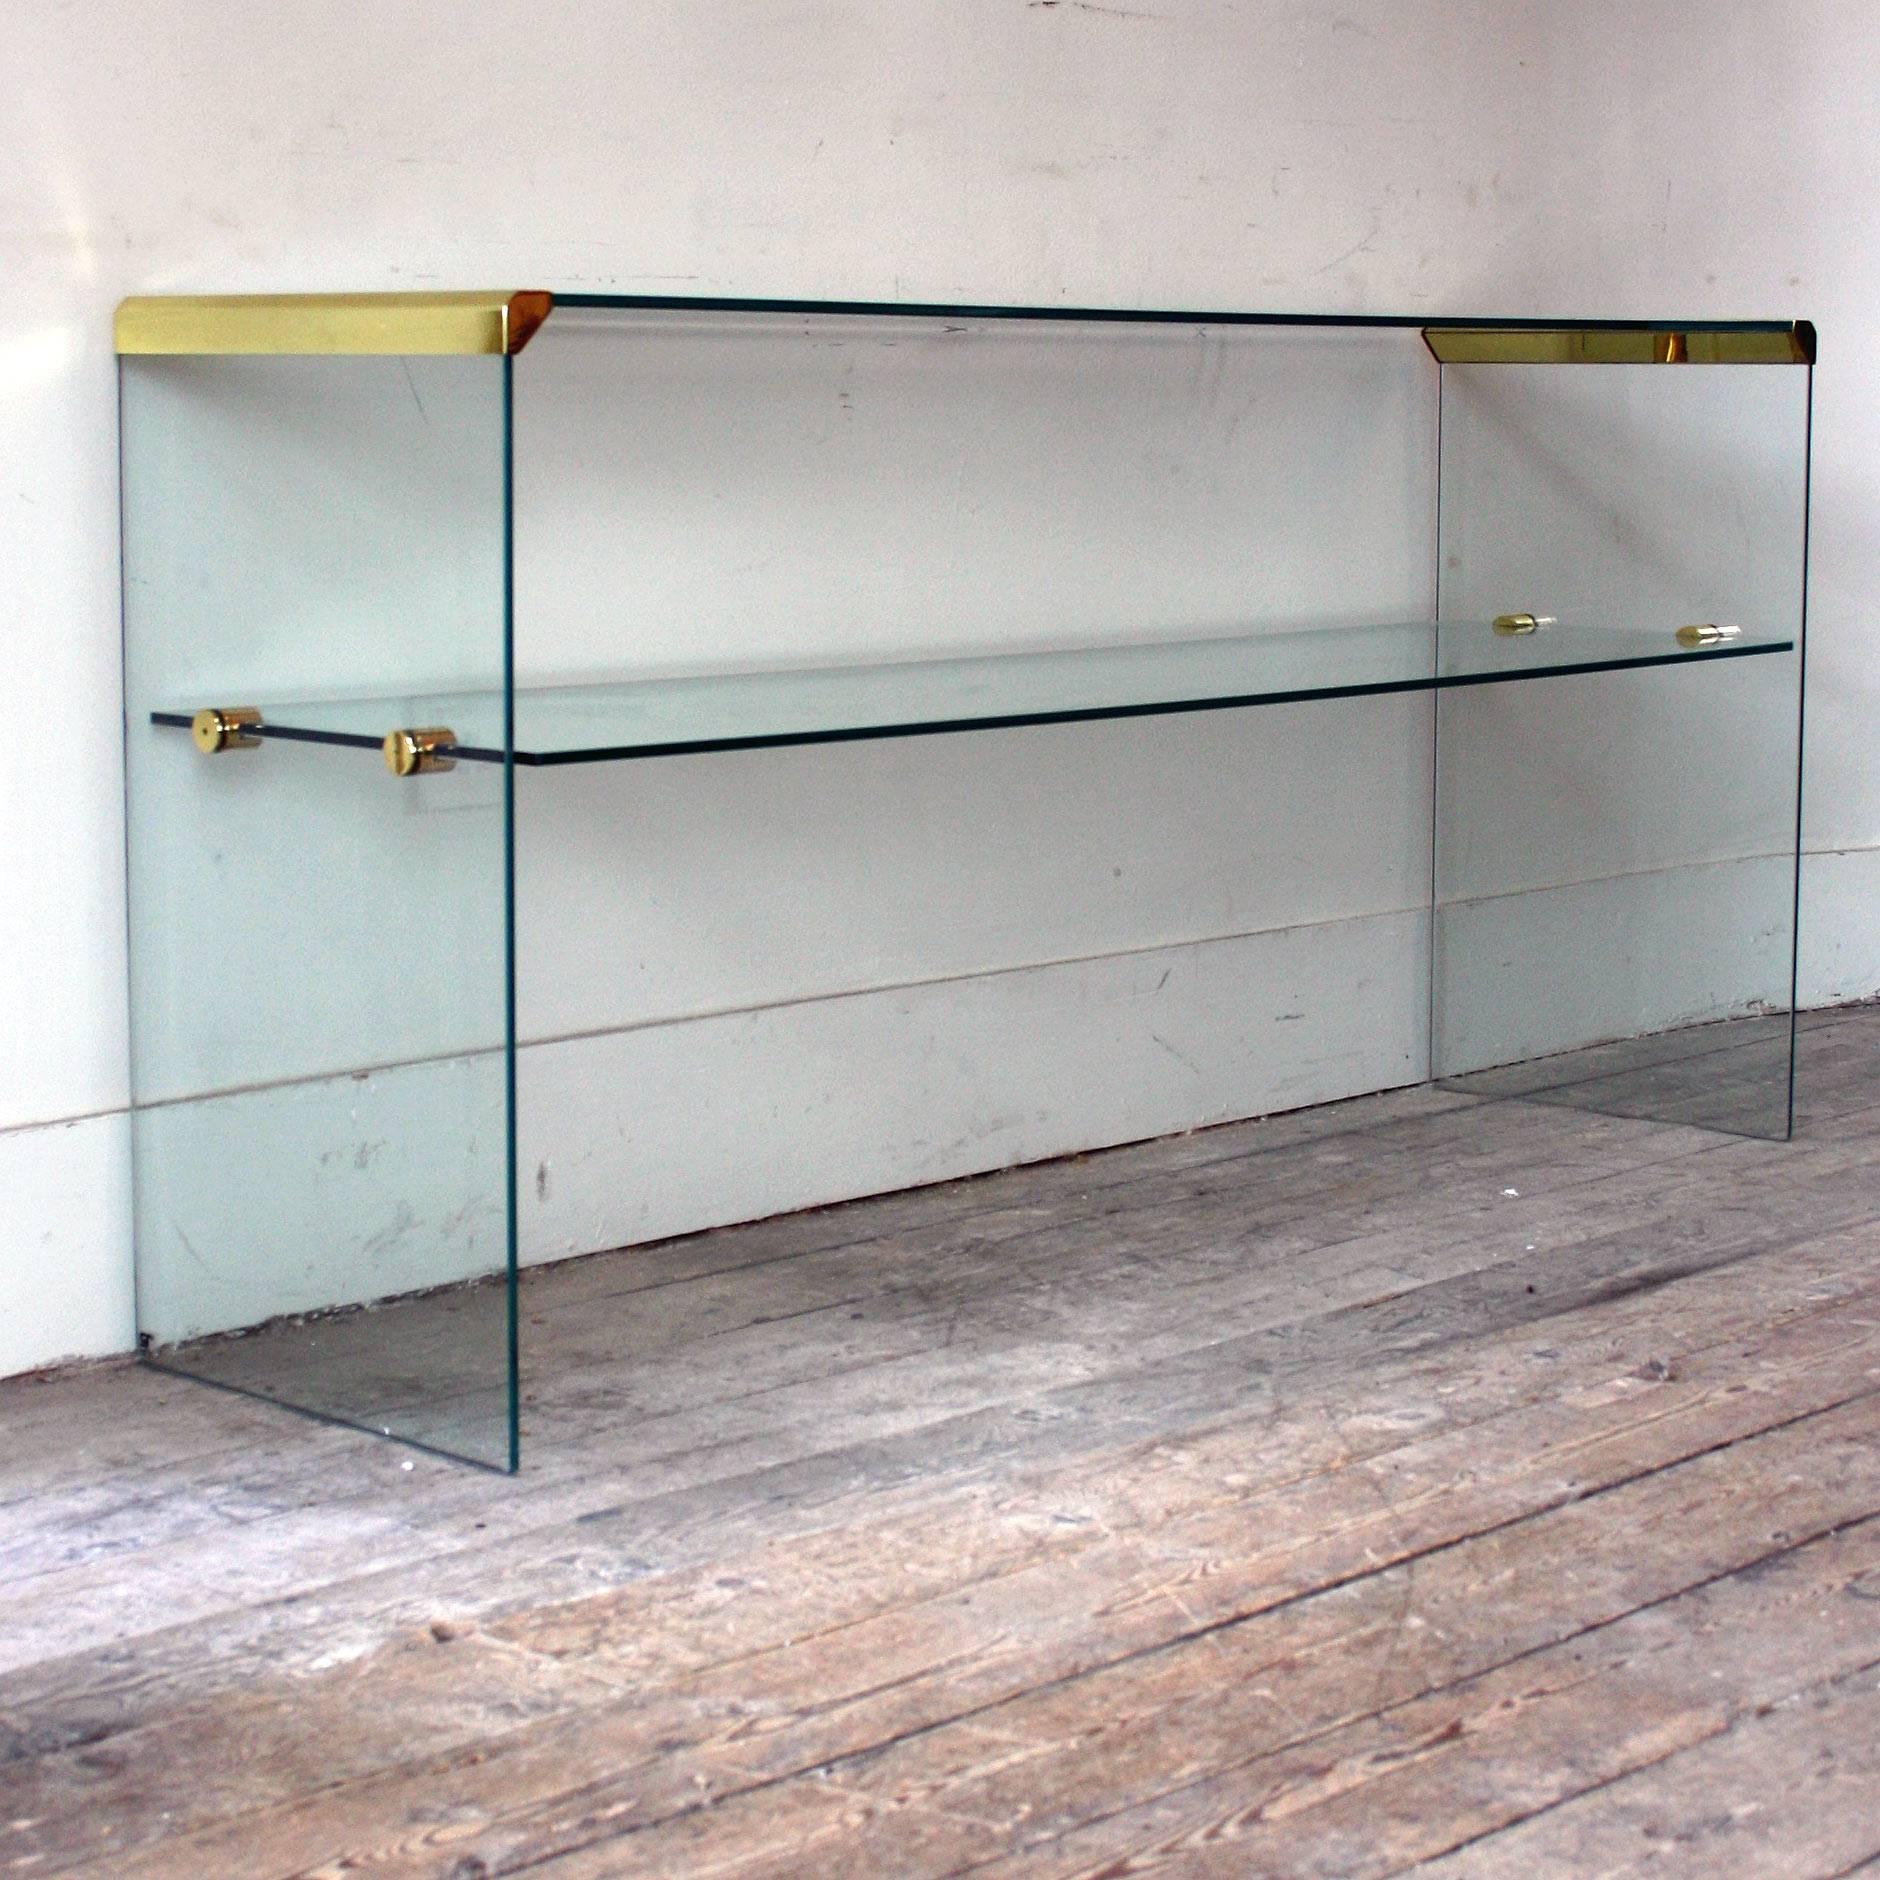 This large Italian glass console table from Pierangeli Gallotti was produced in the 1980s by Gallotti & Radice, the console has thick tempered transparent glass and has stainless steel gold colored edges contrasting beautifully against the